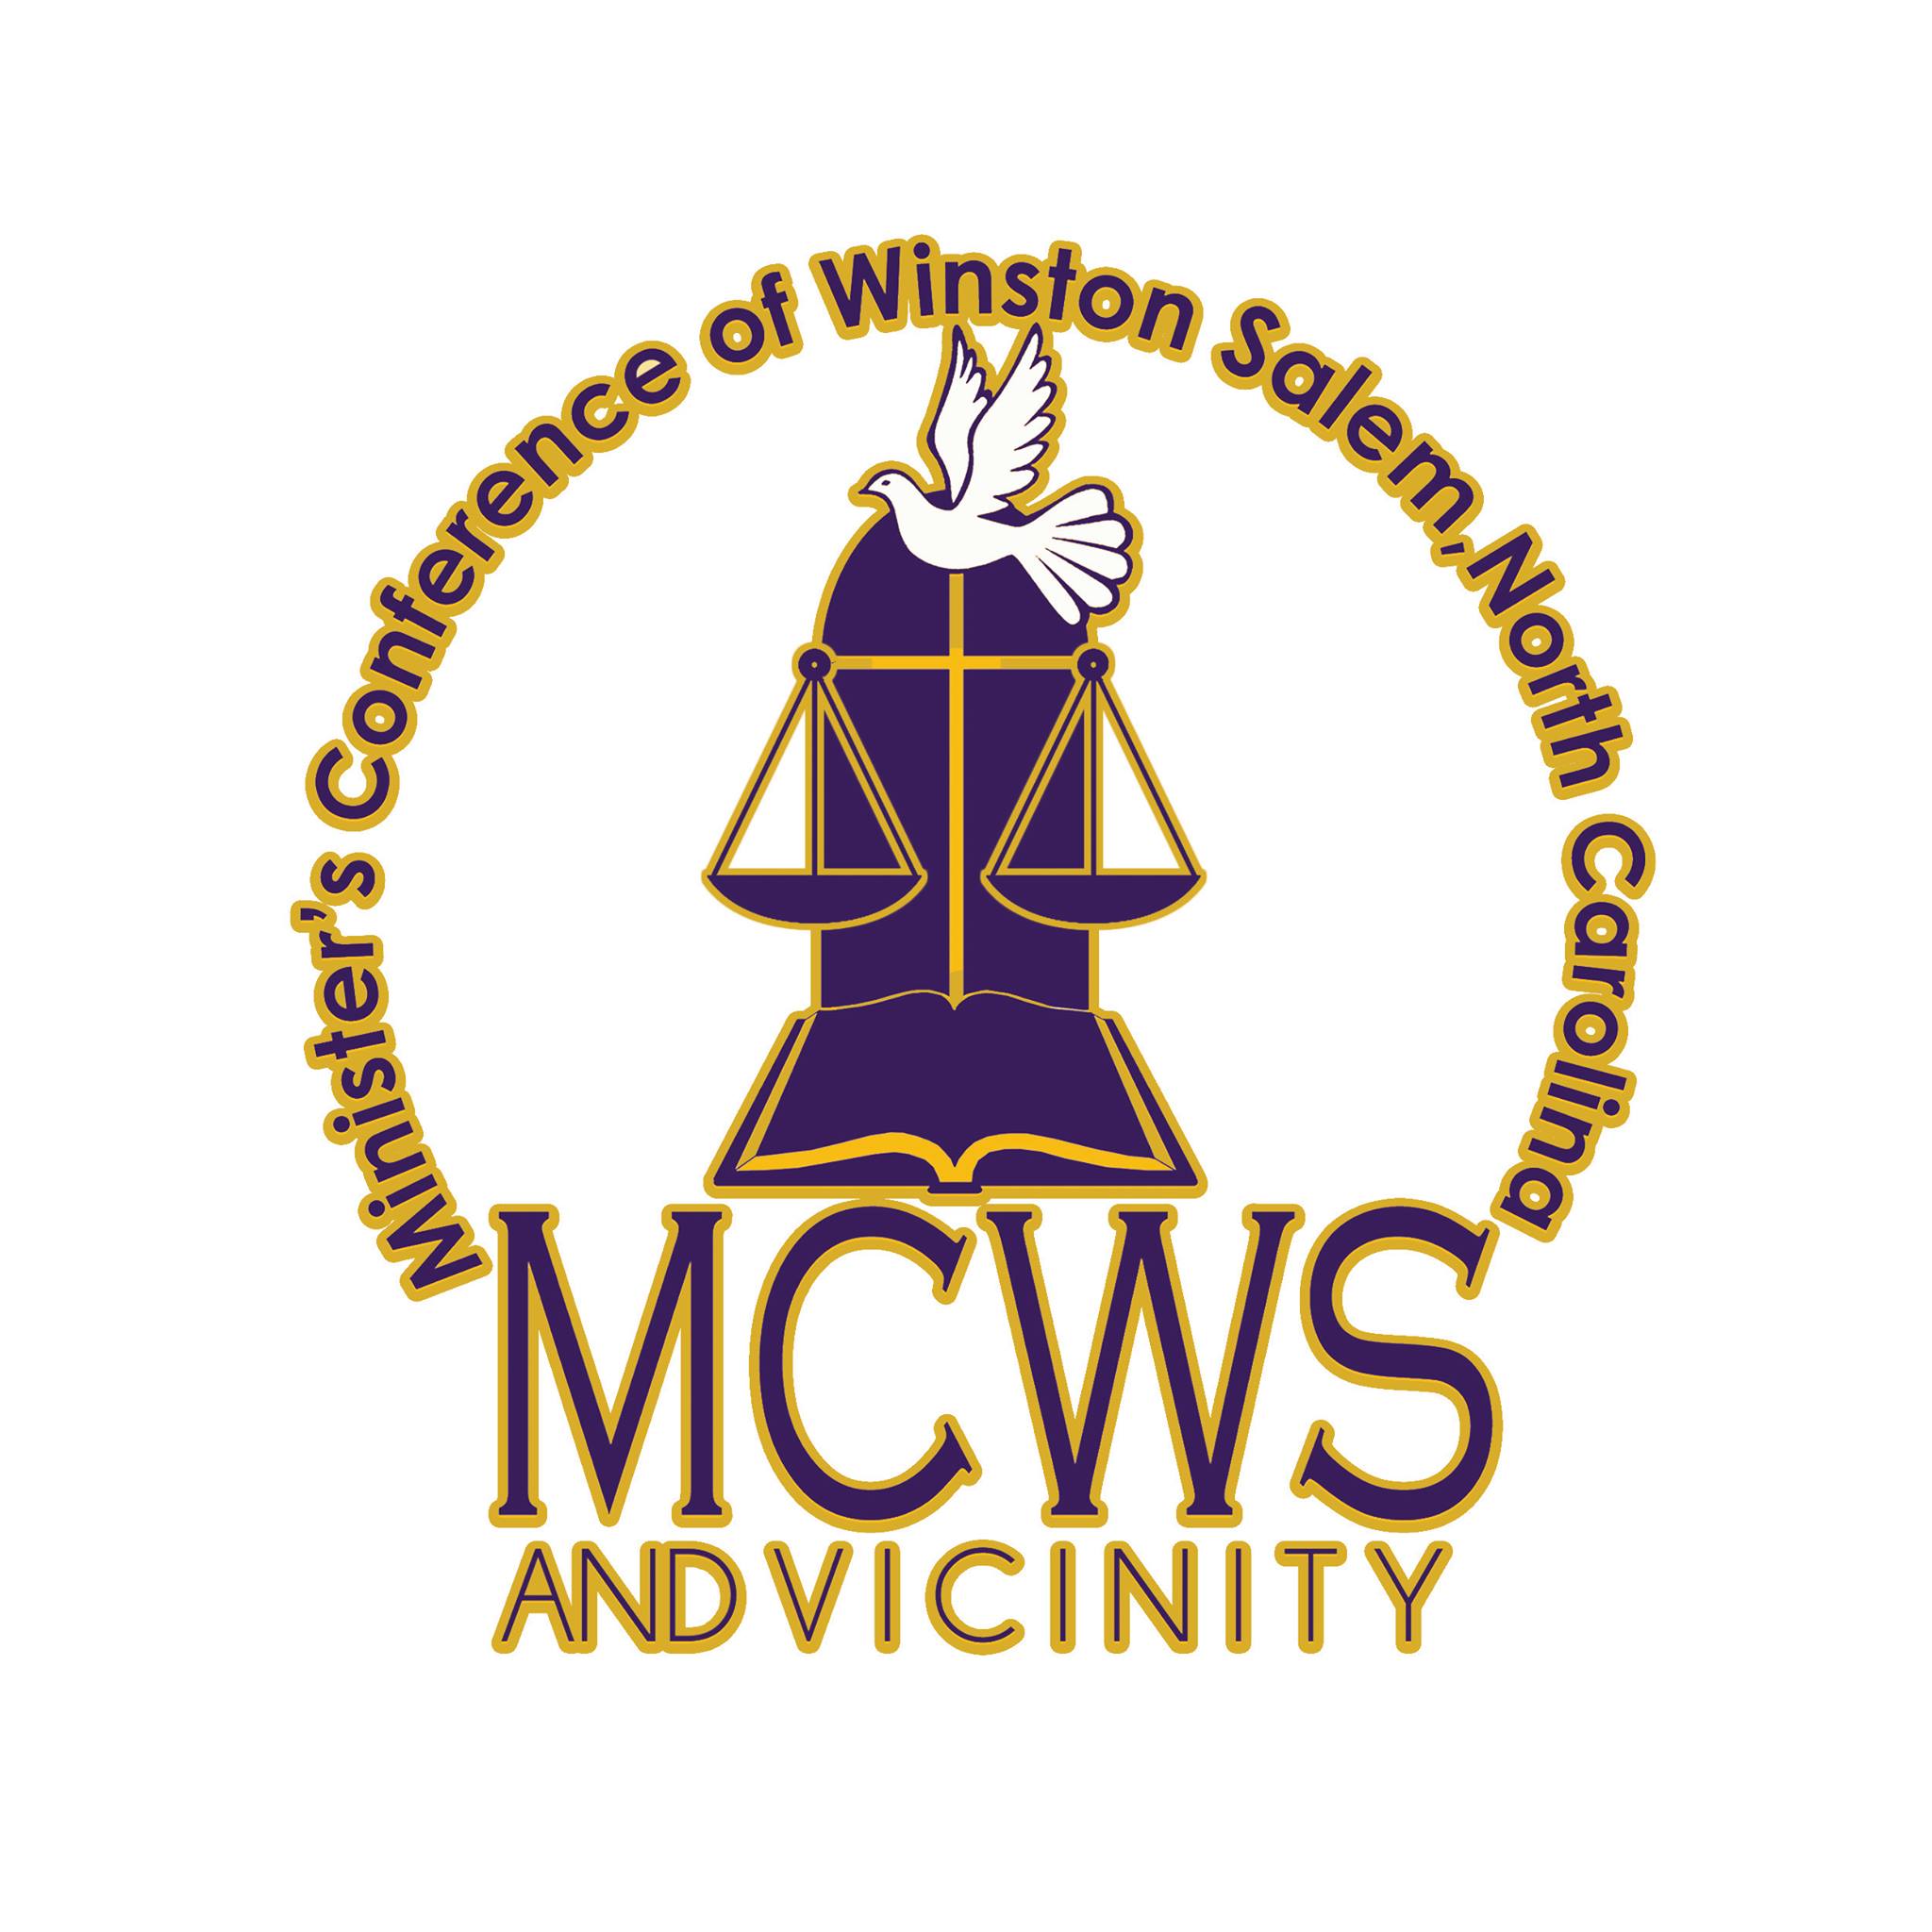 The logo of the Ministers' Conference of Winston-Salem, NC. Text in a semi-circle around an image of a dove atop scales over an open book. At the bottom it reads "MCWS And Vicinity". The image is on a white background with purple text and yellow outlines.